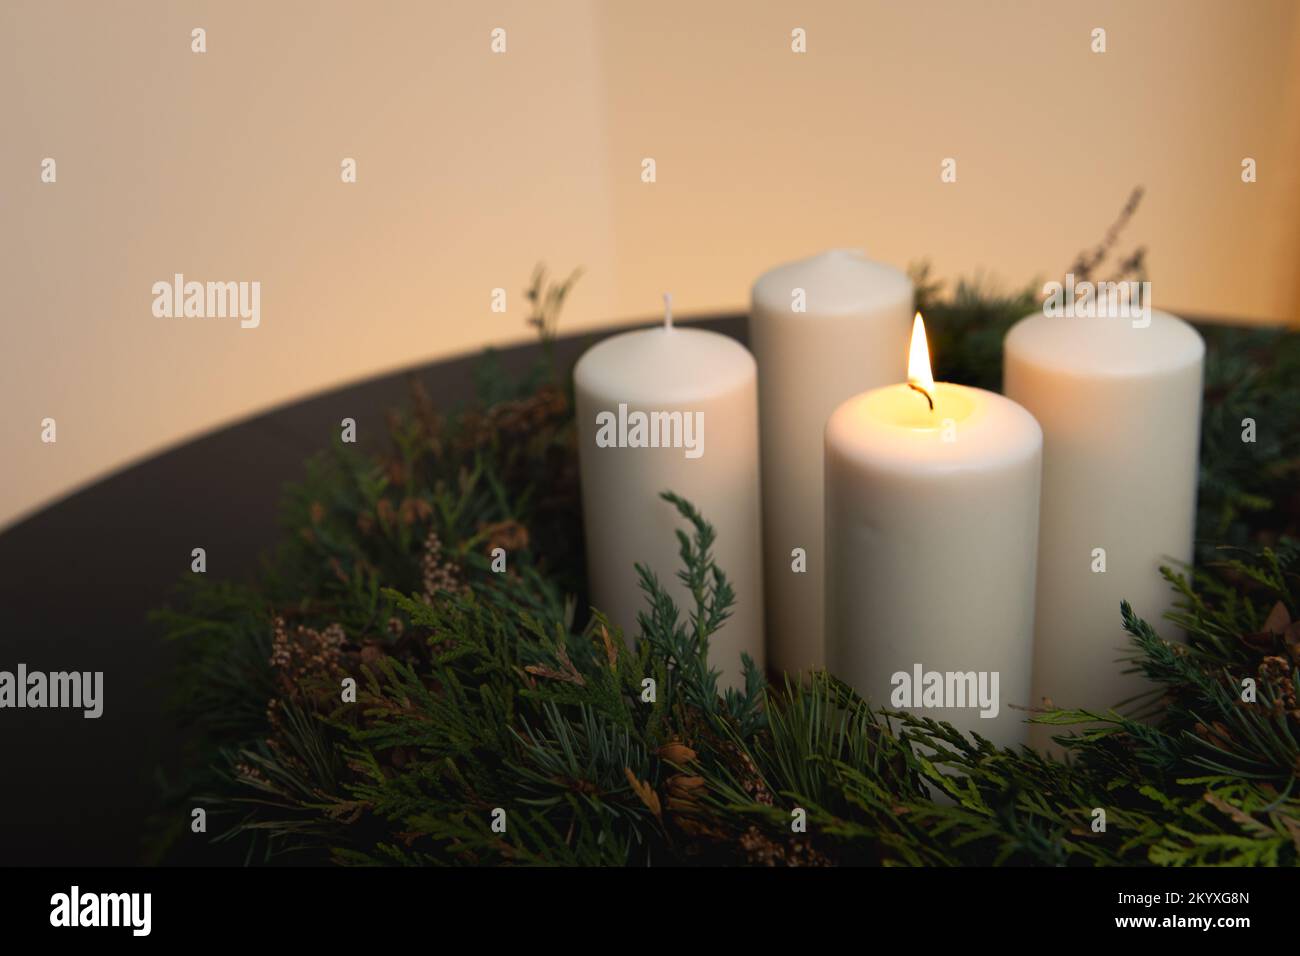 Advent wreath with one lighted candle, waiting for Christmas Stock Photo